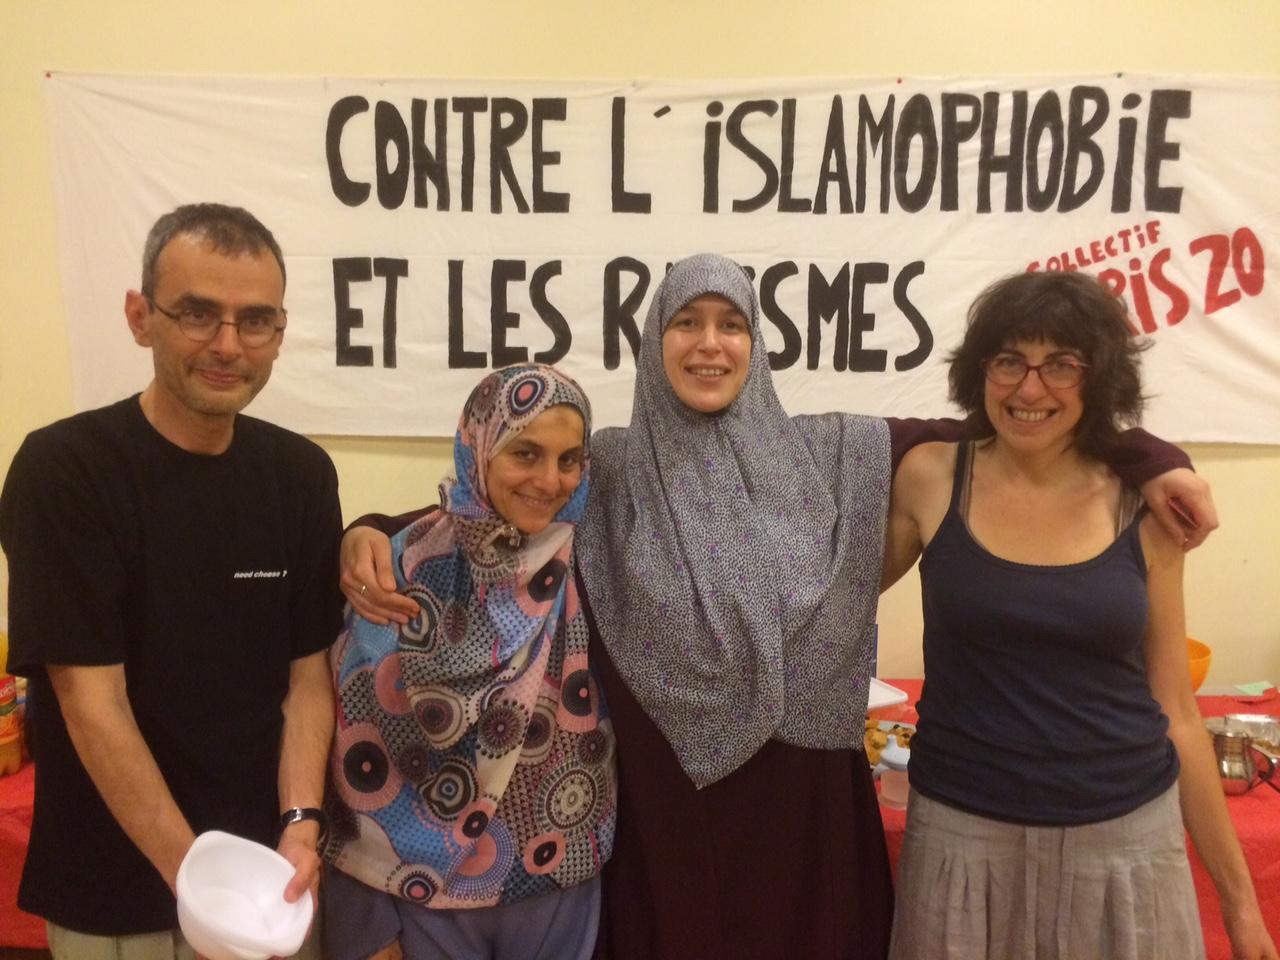 A group in Paris meets to forge friendships across racial lines